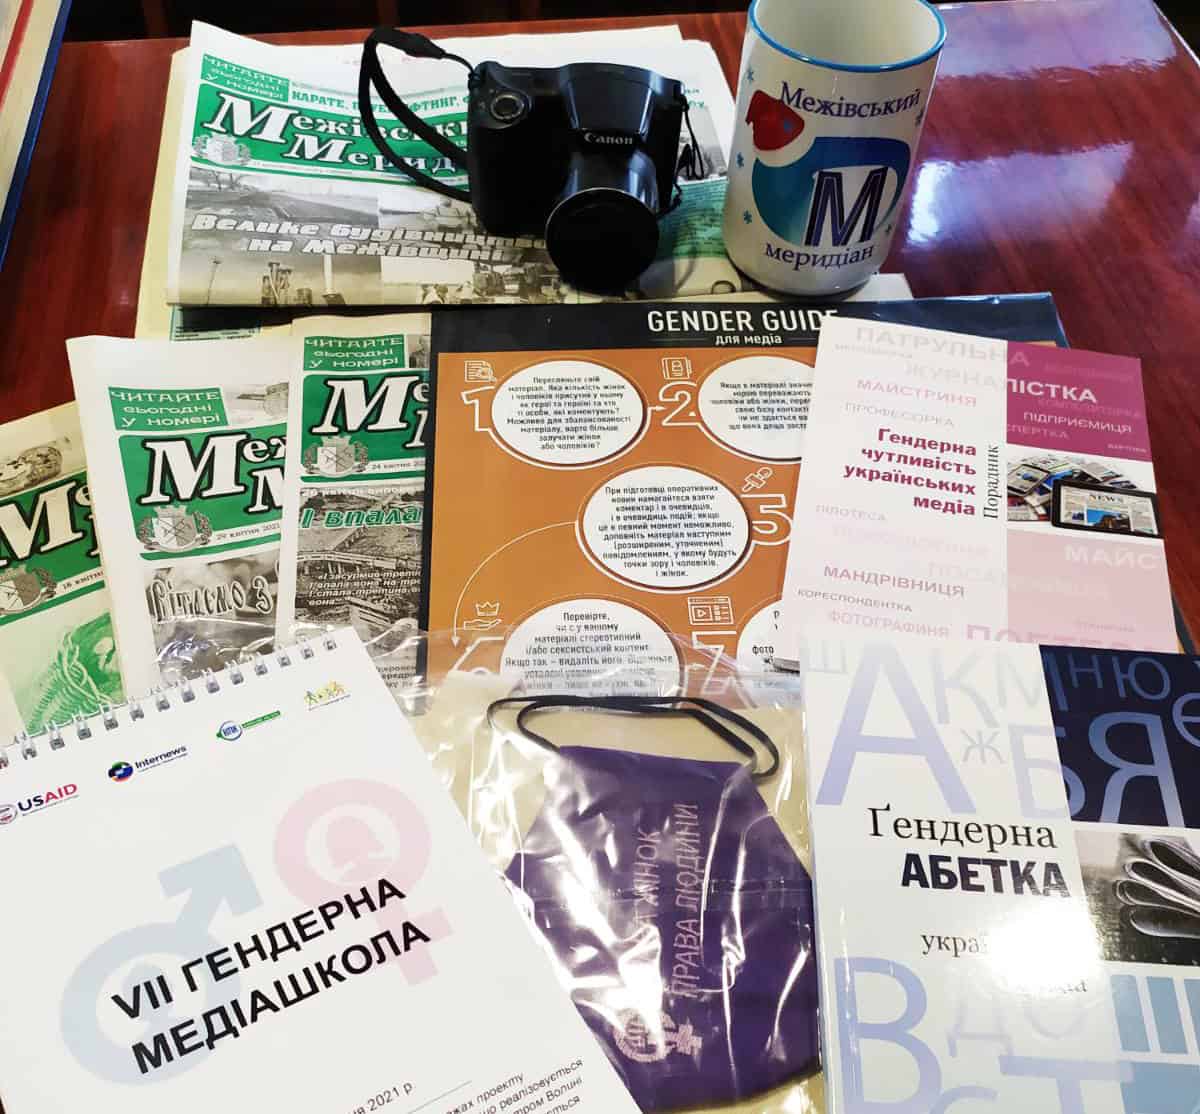 A camera and a mug sit on some newsletters and pamphlets